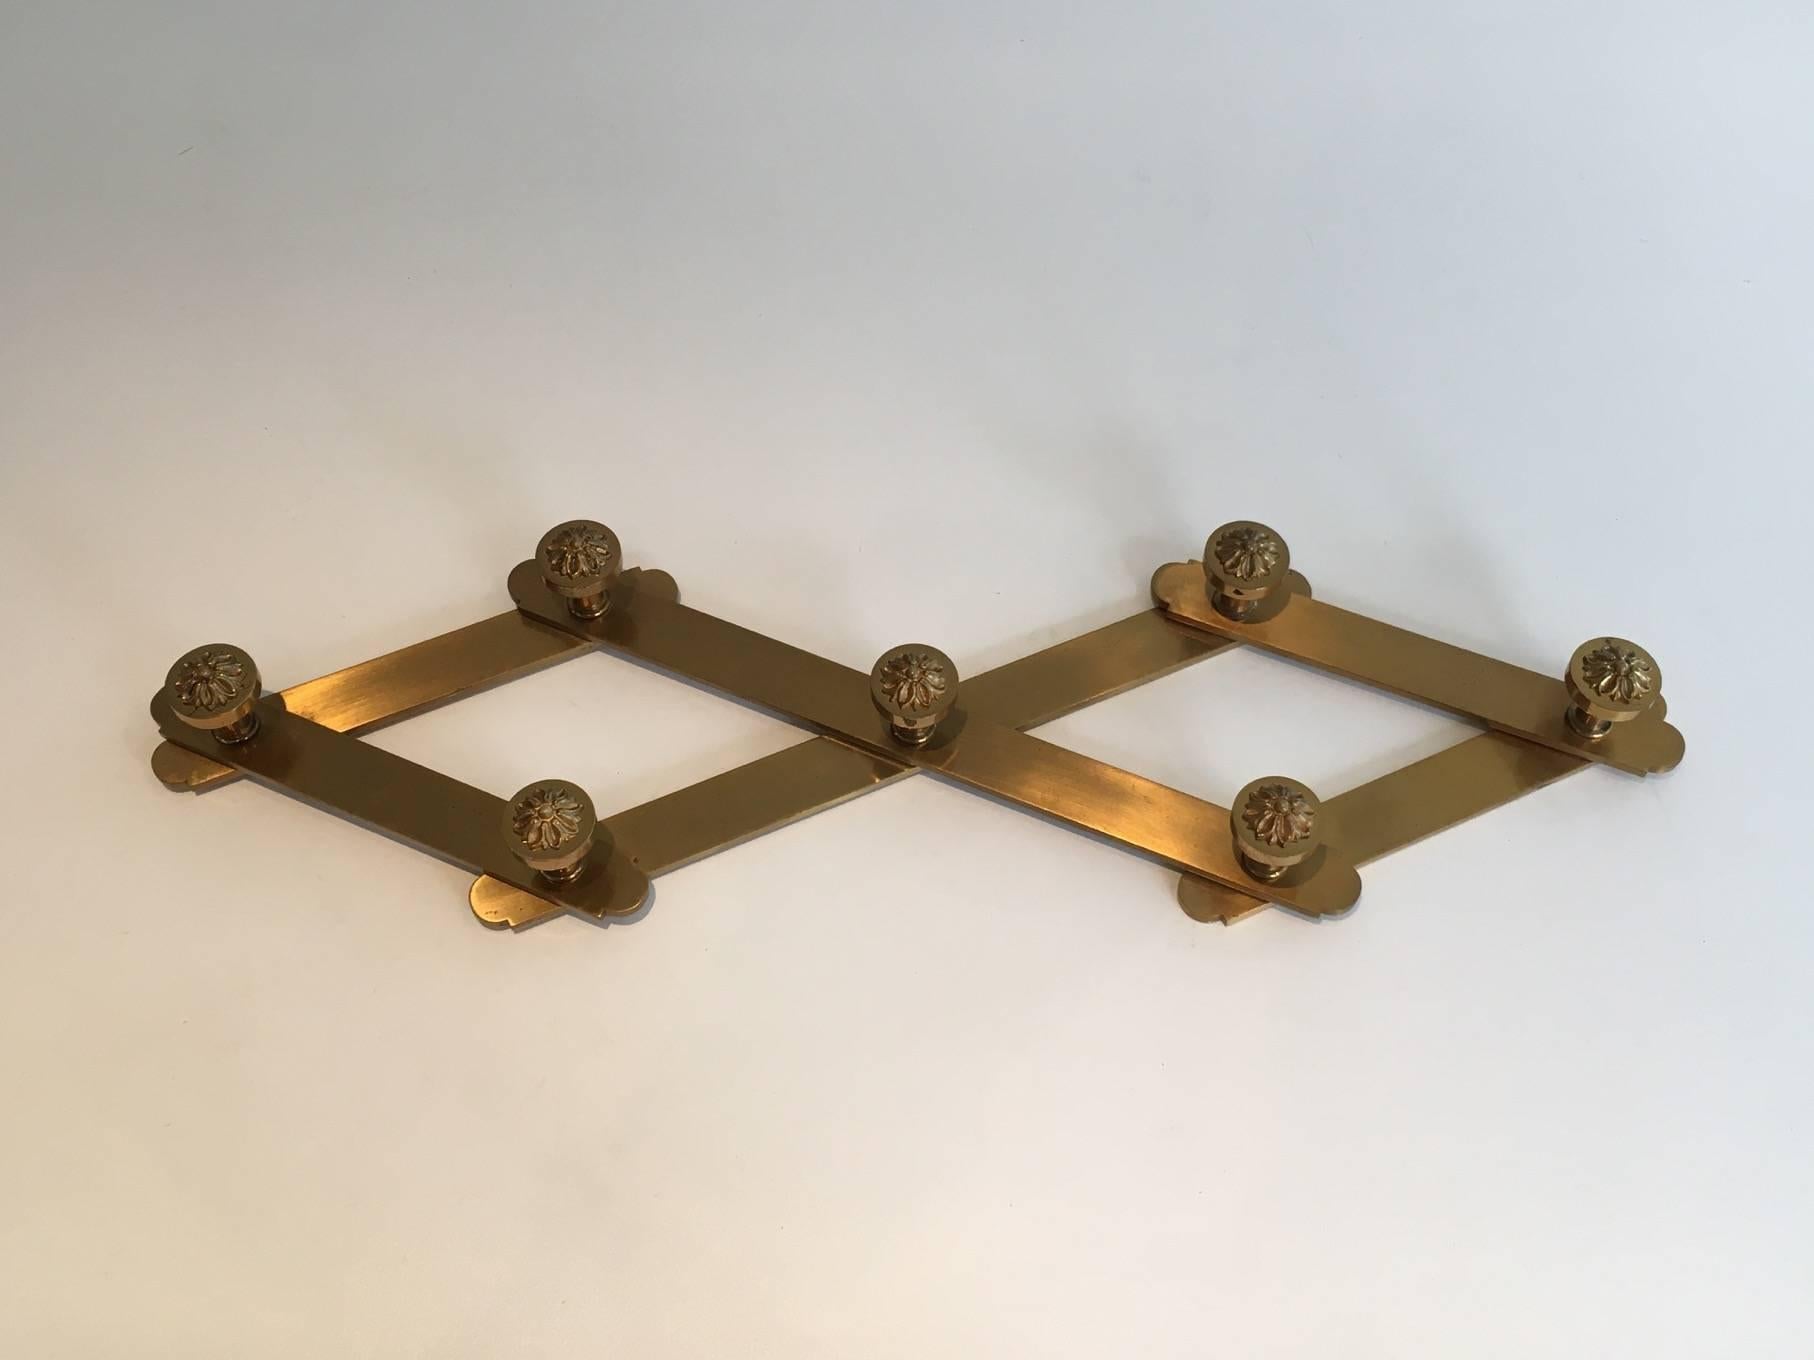 Neoclassical bronze coat hanger with bronze chiselled hooks. In the style of Maison Jansen. French, circa 1960.


This item is currently in France, please allow 2 to 4 weeks delivery to New York. Shipping costs from France to our warehouse in New